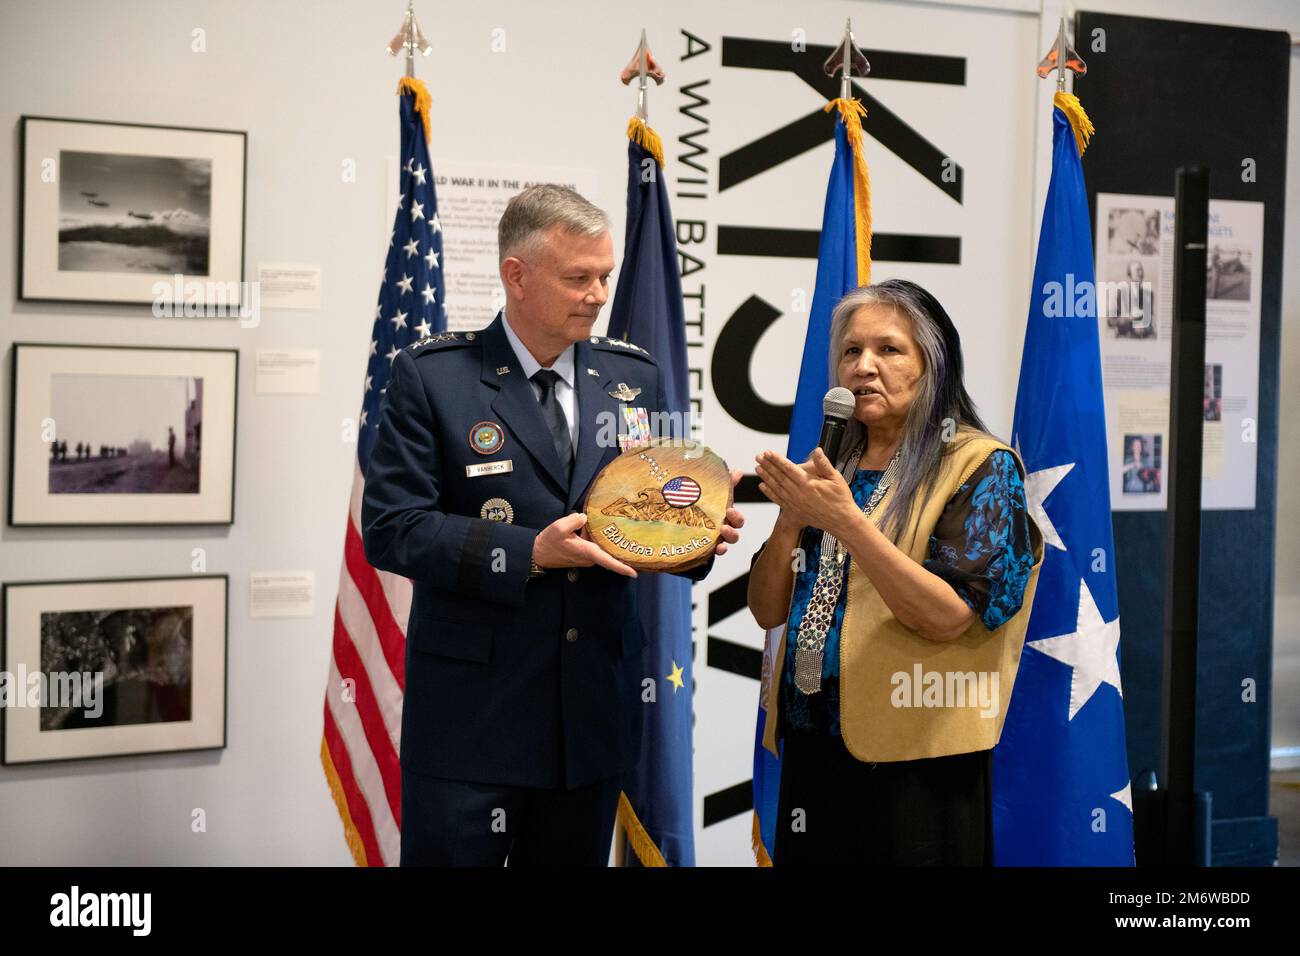 Gen. Glen VanHerck, Commander, North American Aerospace Defense Command and U.S. Northern Command, is presented a gift from Marie Coleman, 2nd Chief, Native Village of Eklutna, Alaska, before providing the keynote address highlighting the 75th Anniversary of Alaskan Command, a USNORTHCOM subordinate unified command, at the Alaska Aviation Museum, Anchorage, Alaska, May 6, 2022. Ms. Coleman was the guest speaker for the event. (Department of Defense photo by Chuck Marsh) Stock Photo